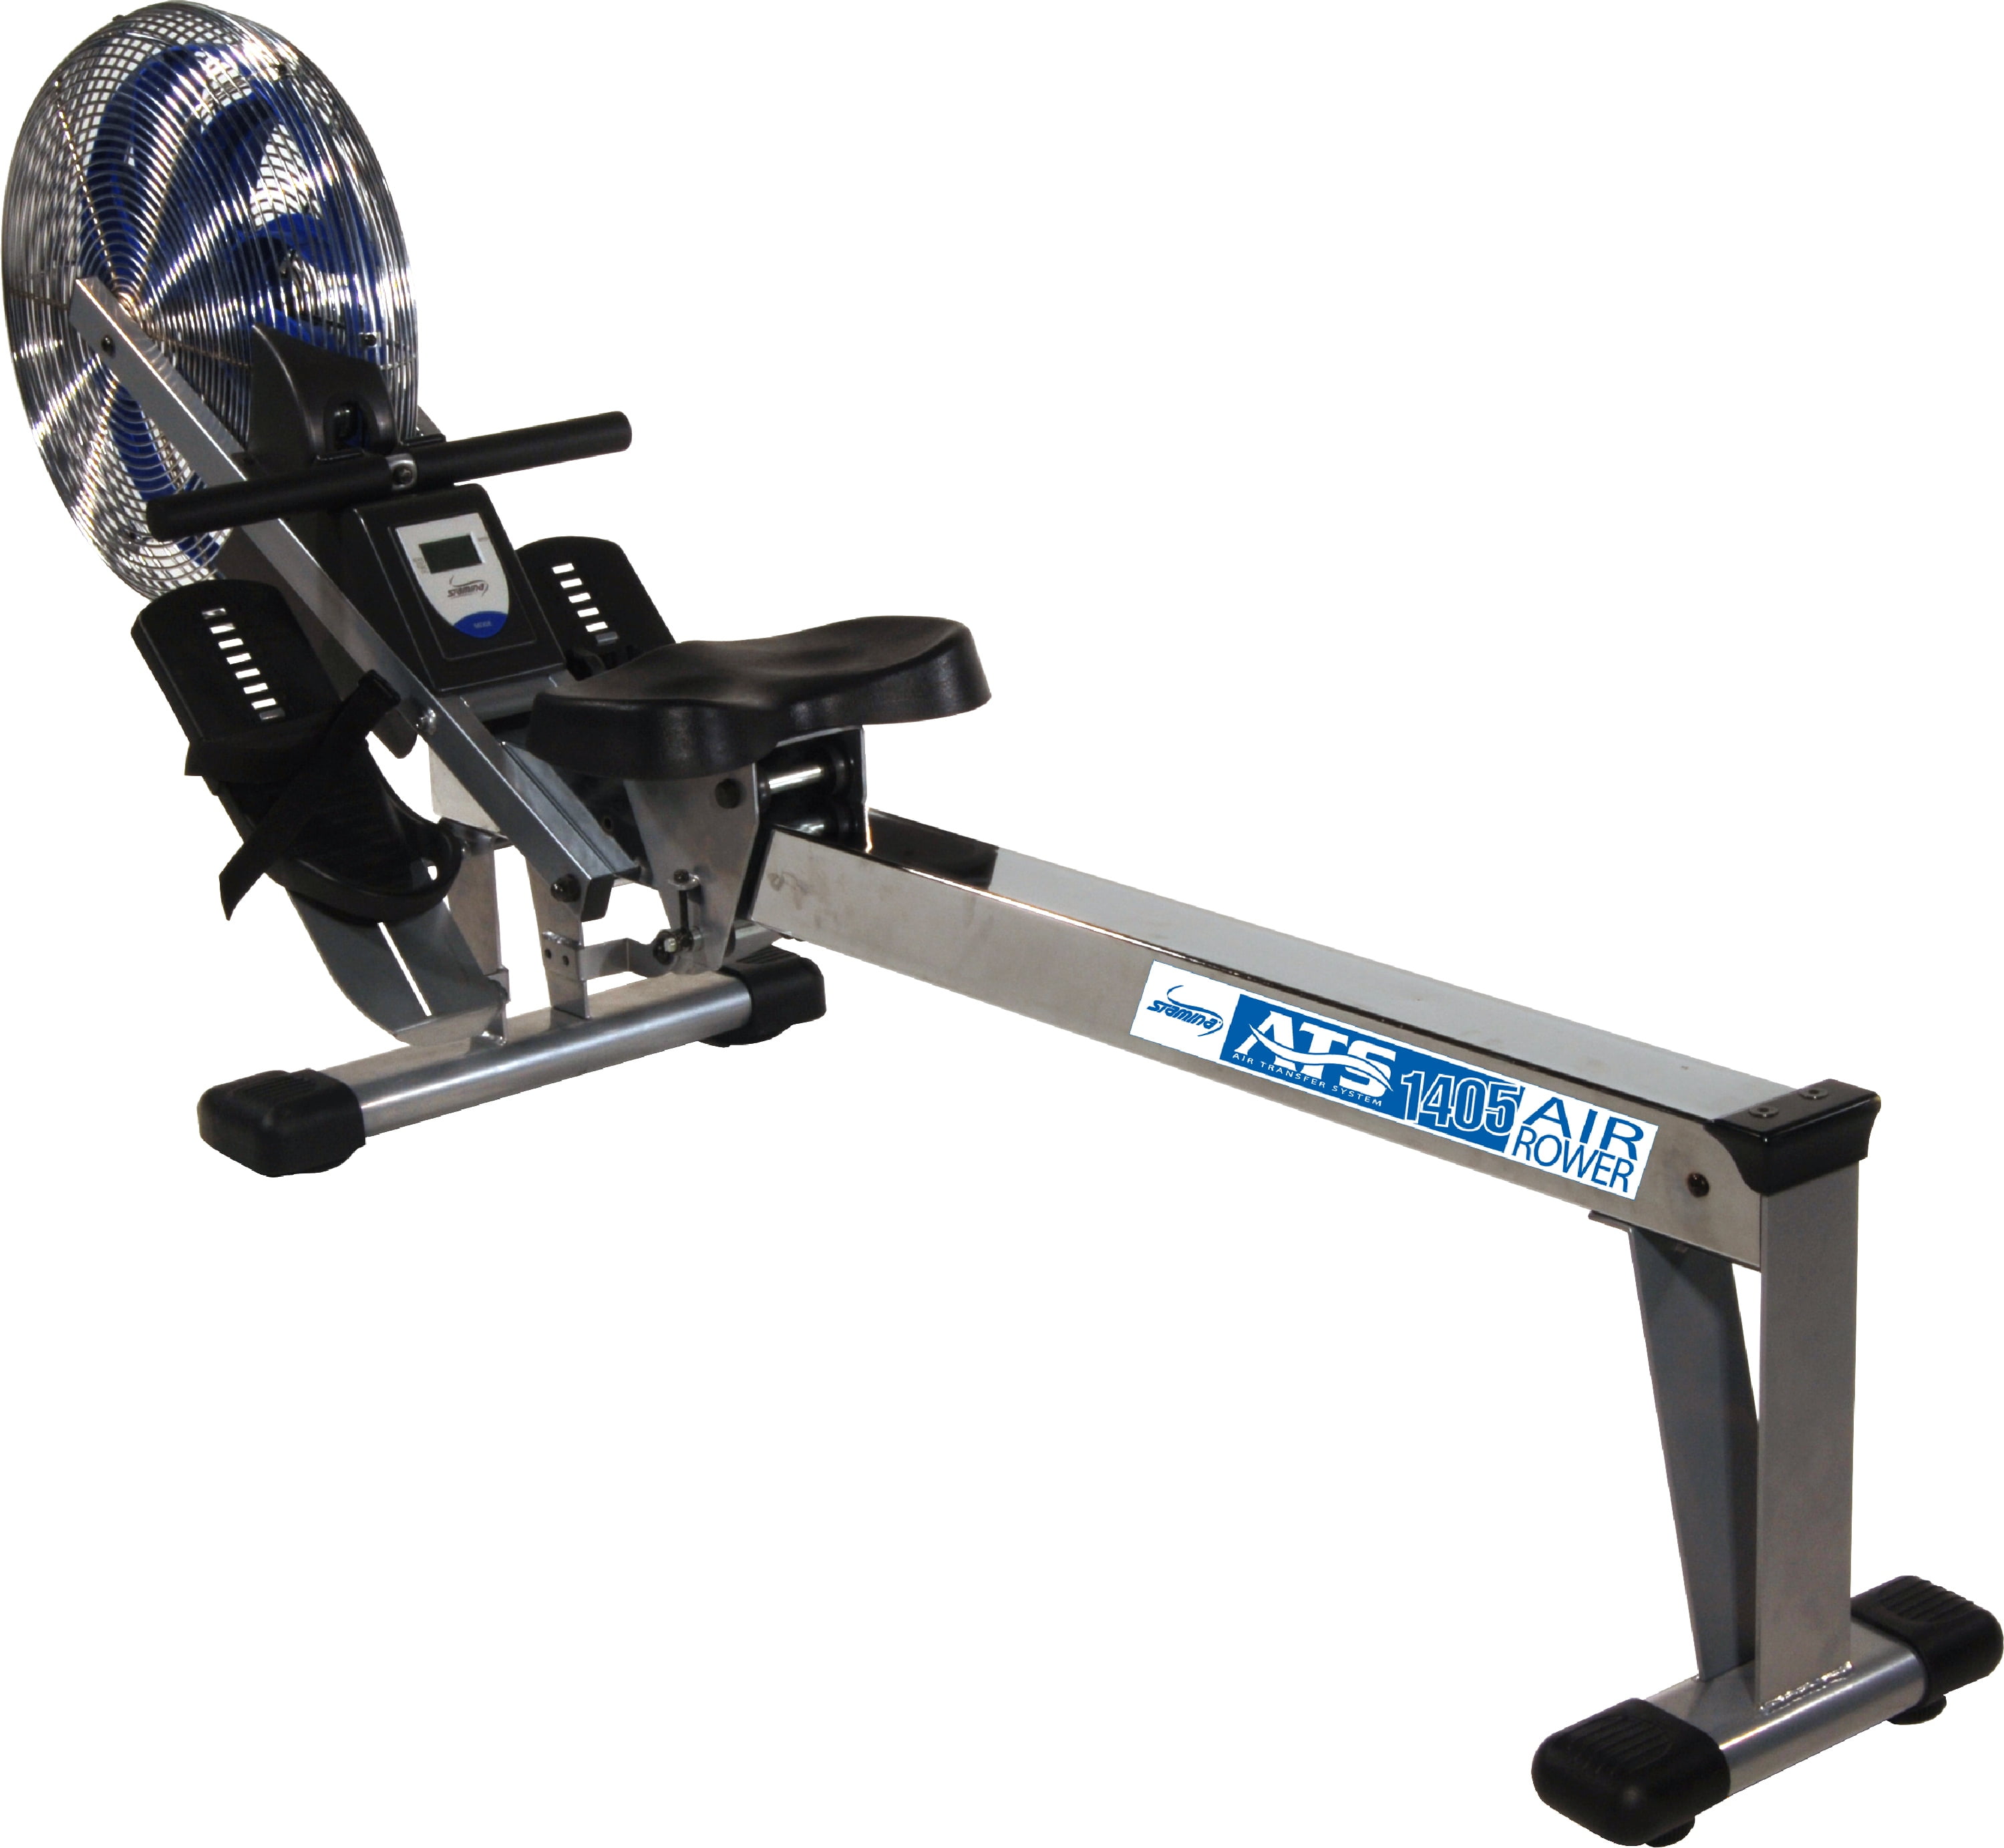 Stamina ATS Cardio Fitness Exercise Rowing Machine 35-1403 for sale online 